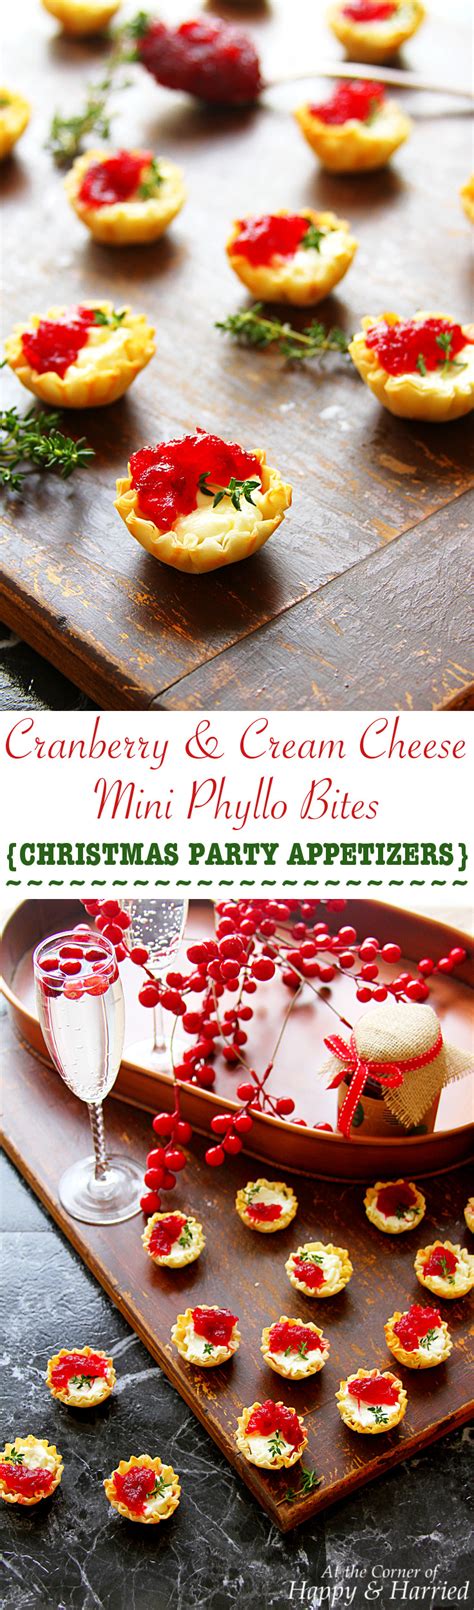 These 10 inexpensive appetizers are perfect for a party, especially during the rushed holiday season. Cranberry & Cream Cheese Mini Phyllo Bites {Christmas Party Appetizers}